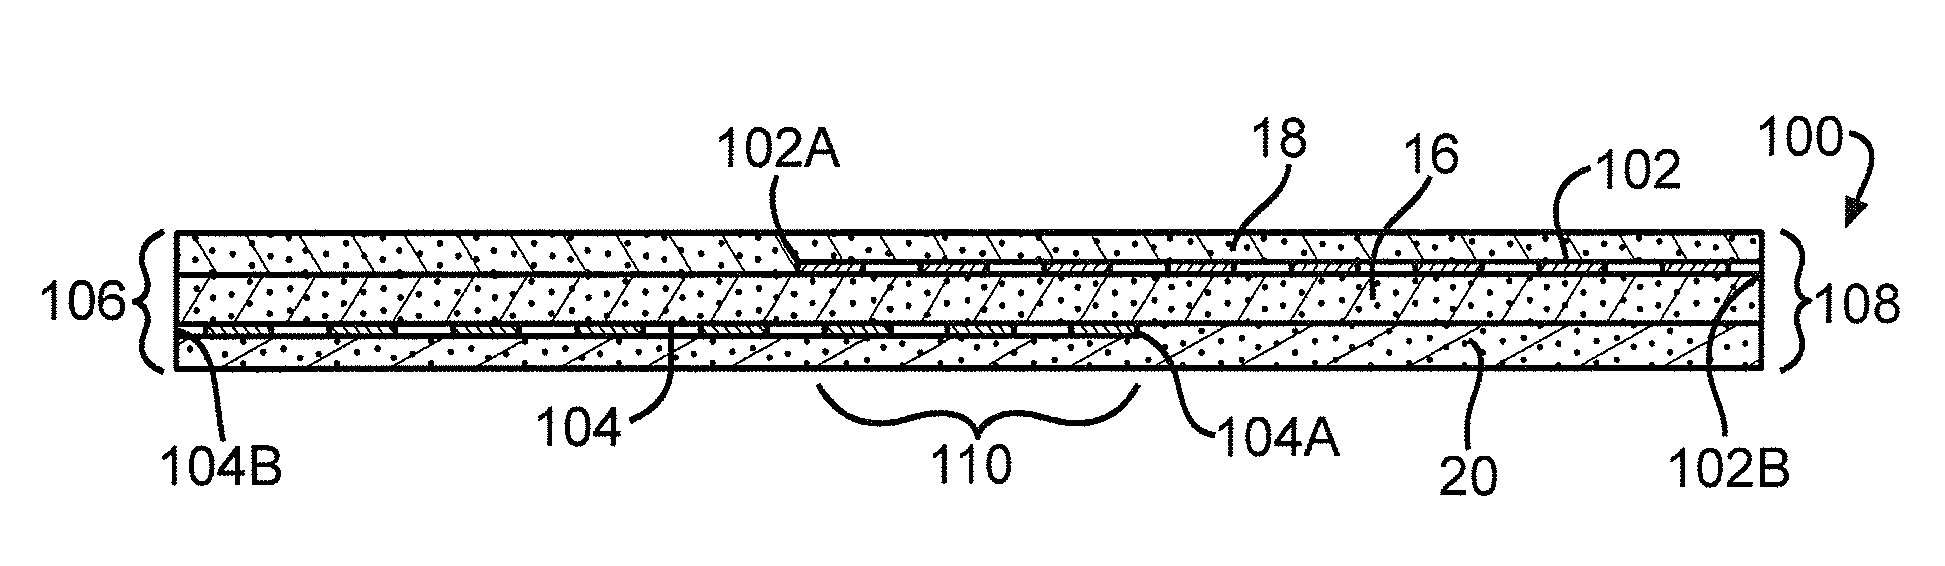 Sandwich cathode electrochemical cell with wound electrode assembly